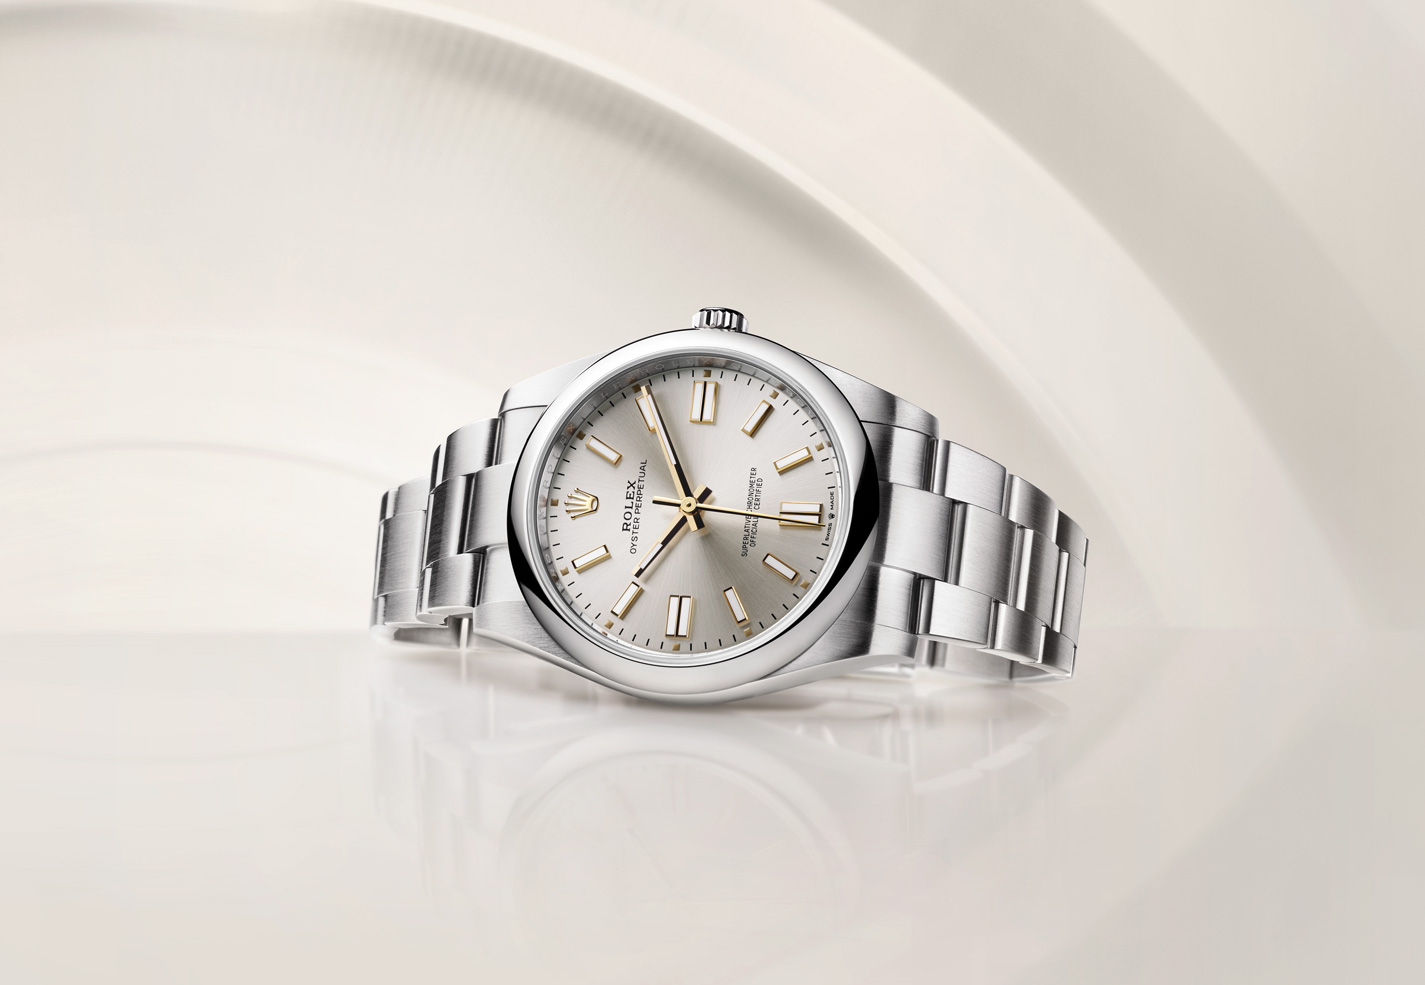 Rolex Oyster Perpetual, the quintessence of the Oyster